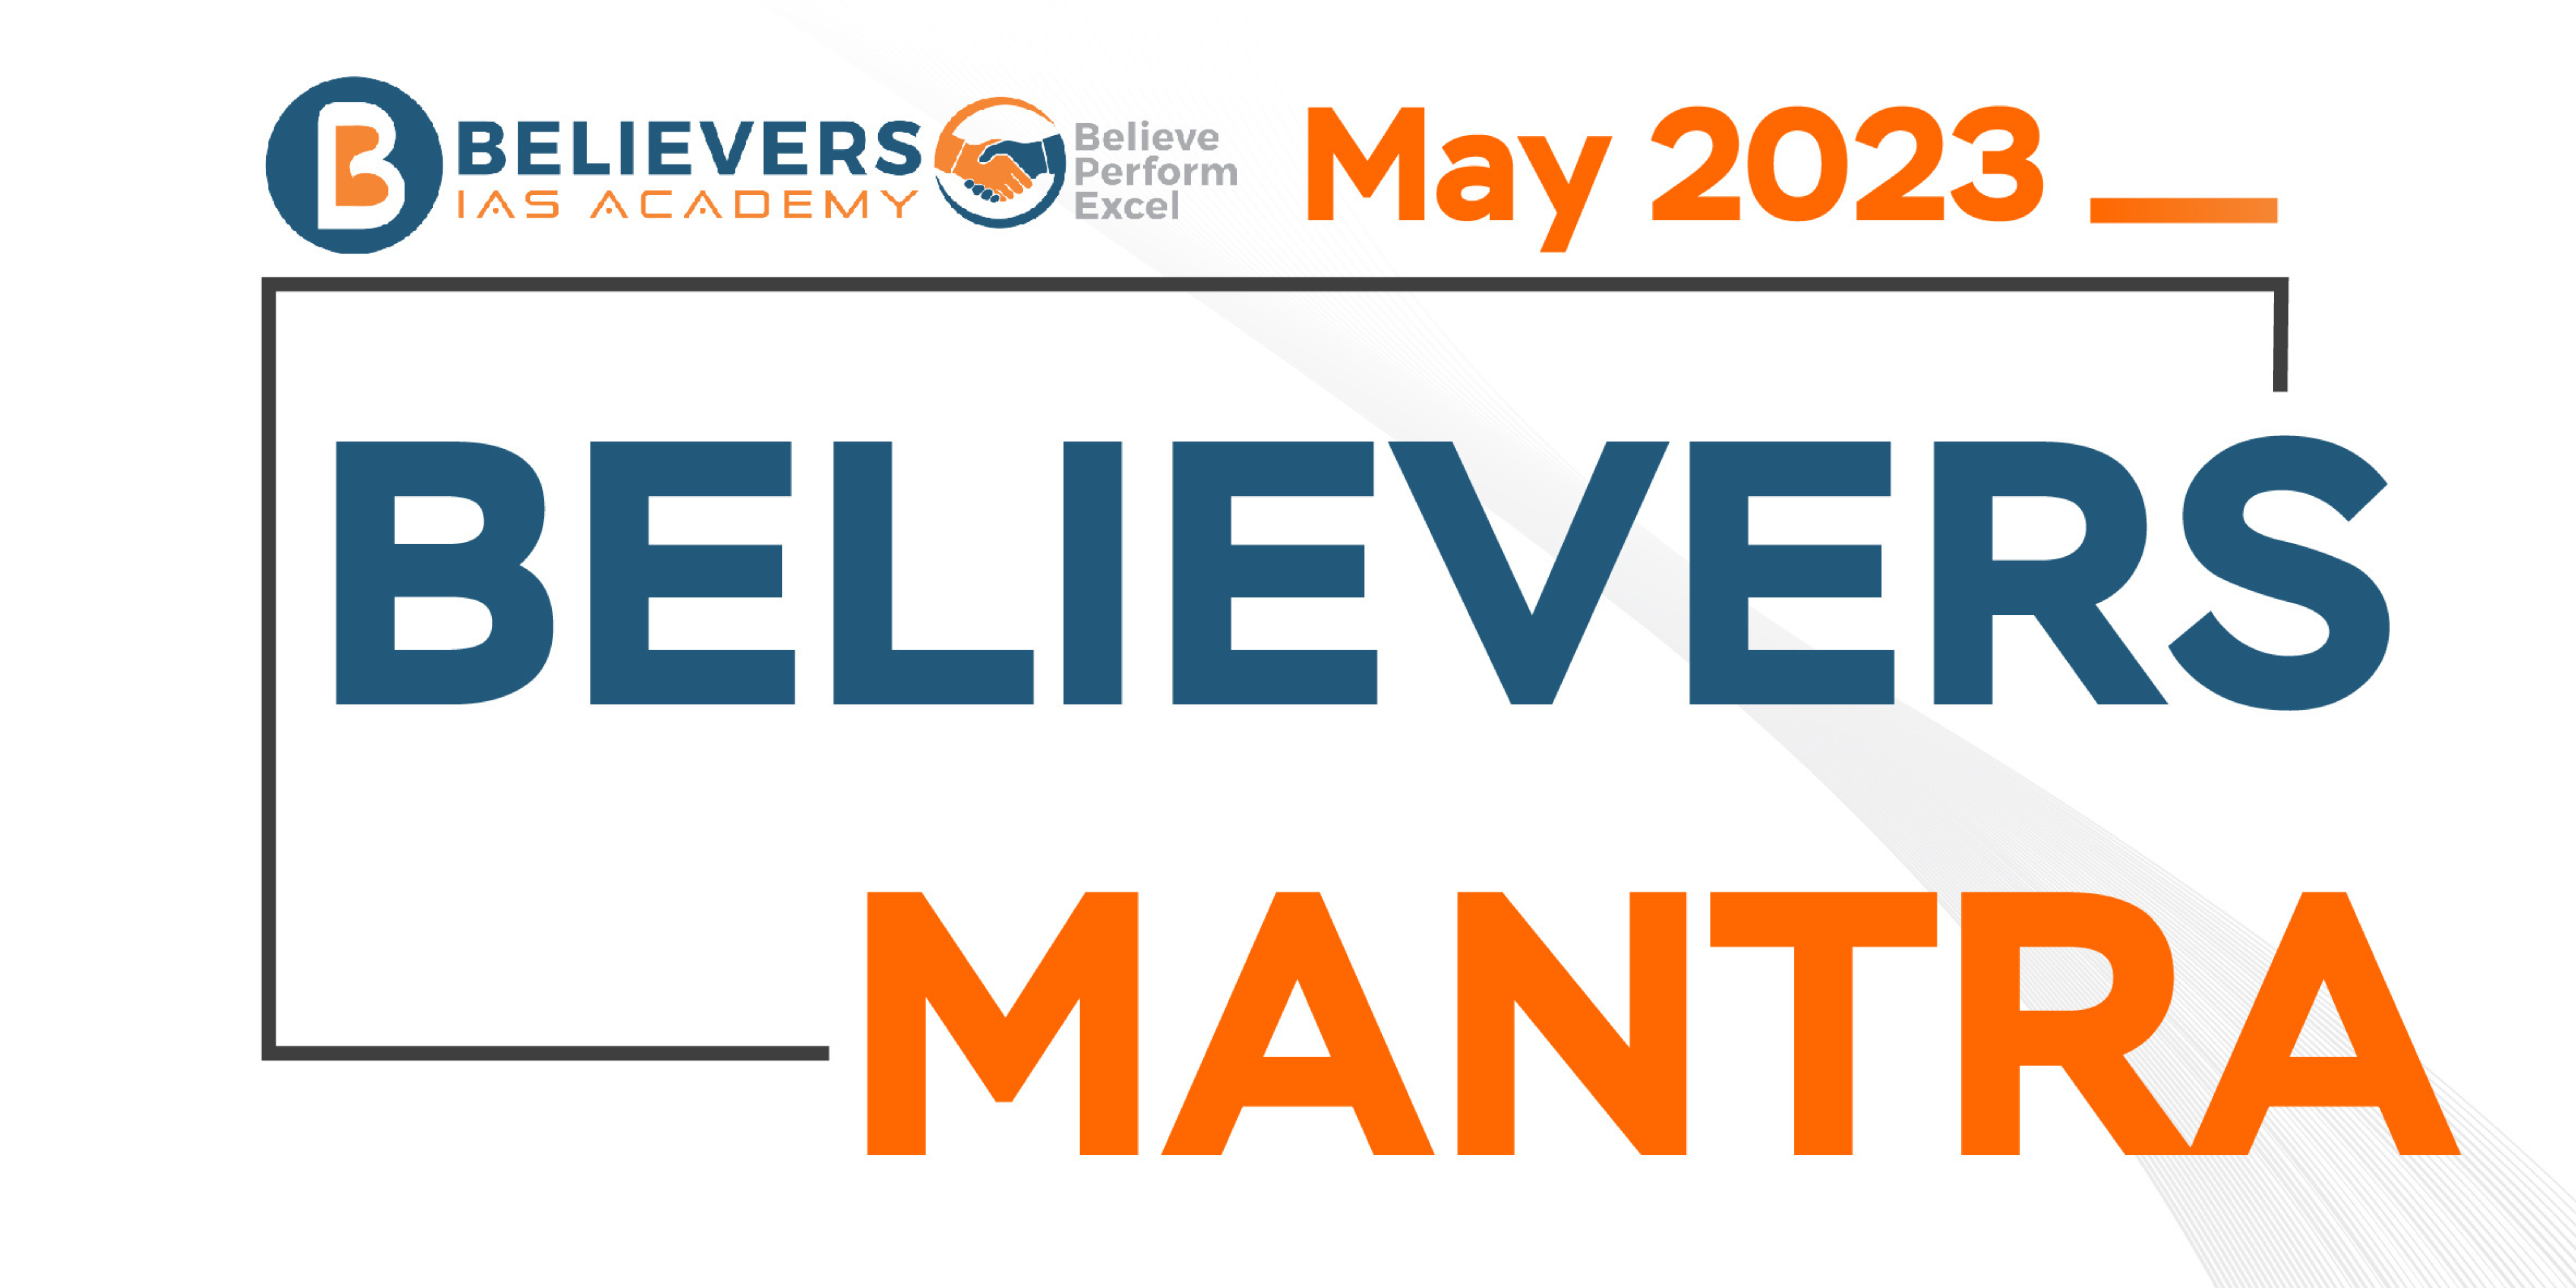 Believers Mantra Magazine May, 2023